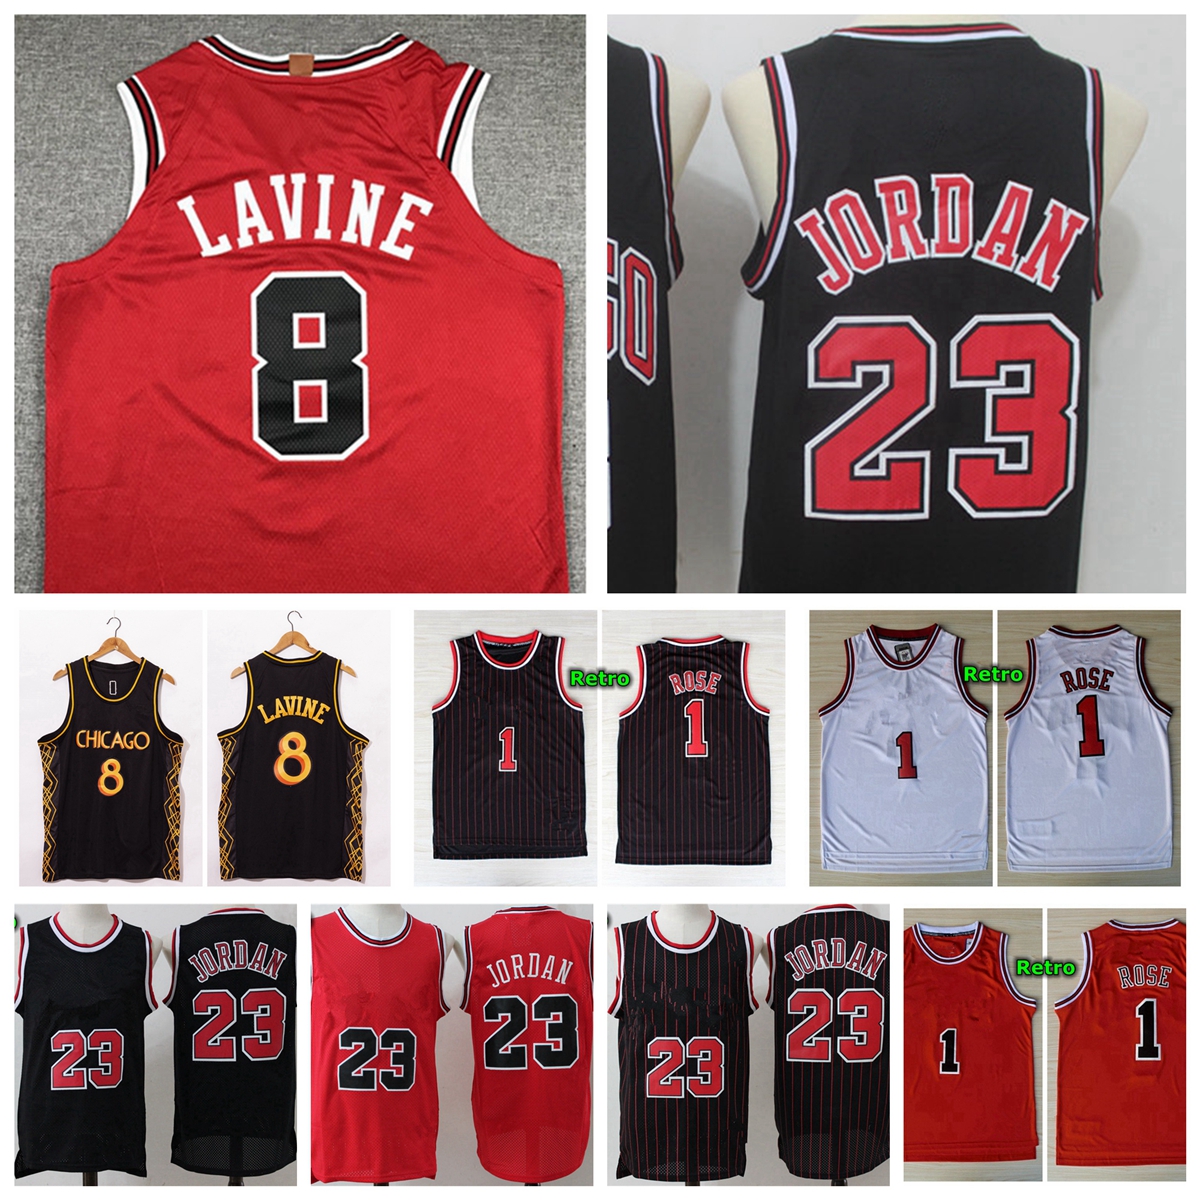 

2021 Mens Youth Kids Zach 8 LaVine Jersey City 23 Edition Authentic Stitched 1 Derrick Rose Retro Classic Mesh Michael Basketball Jerseys, With real logo